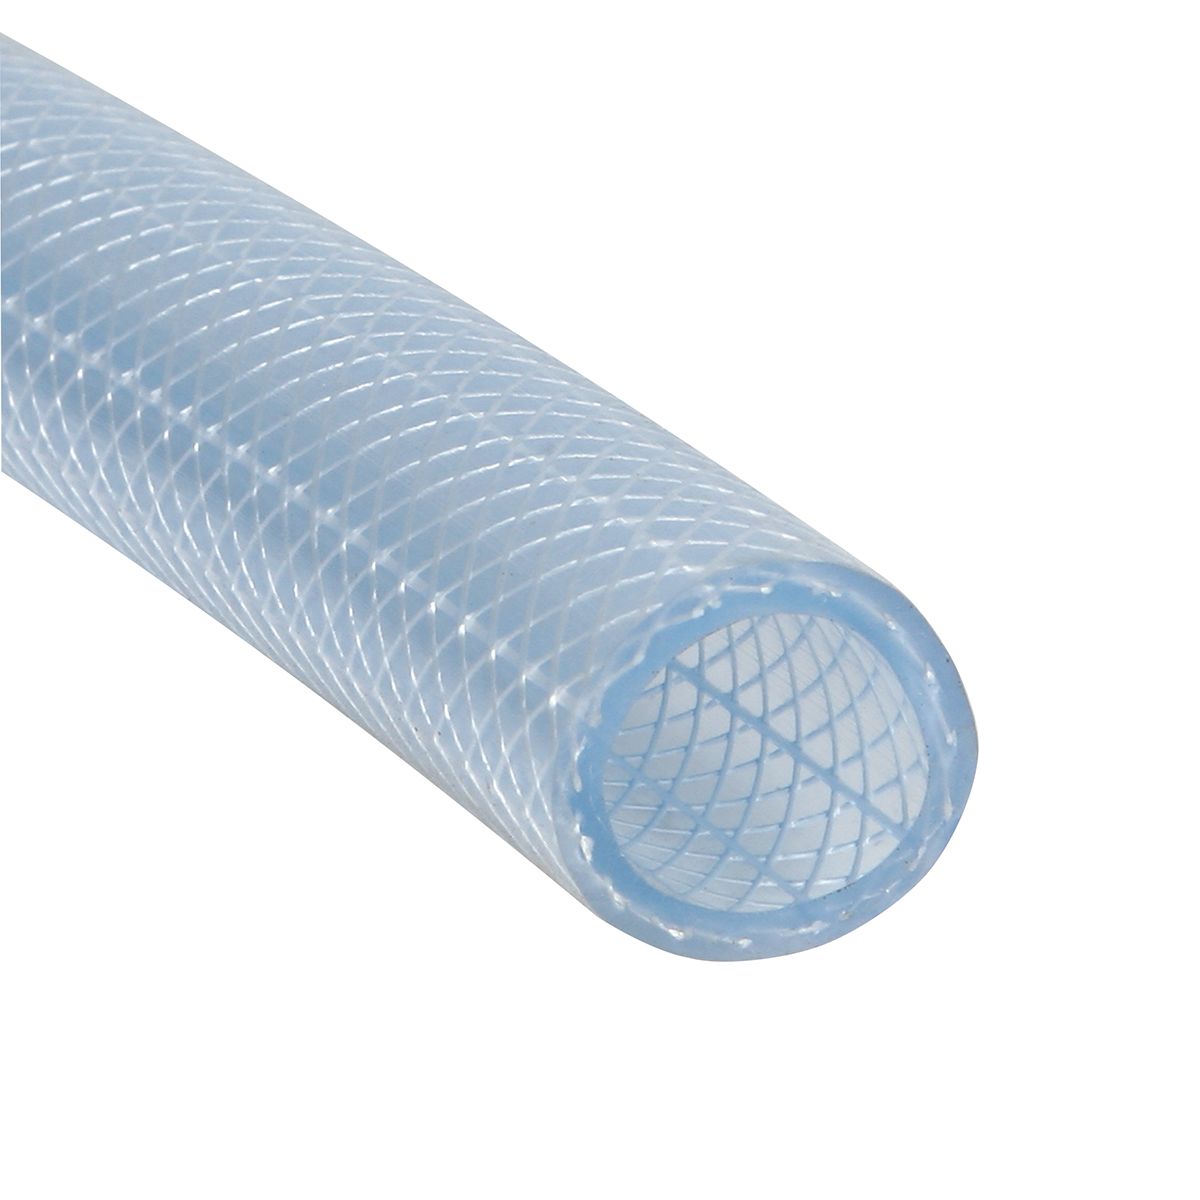 RATING 375 P.S.I. CLEAR BRAIDED VINYL TUBING 1/4” I.D x 1/2” O.D Details about   LDR 10ft 